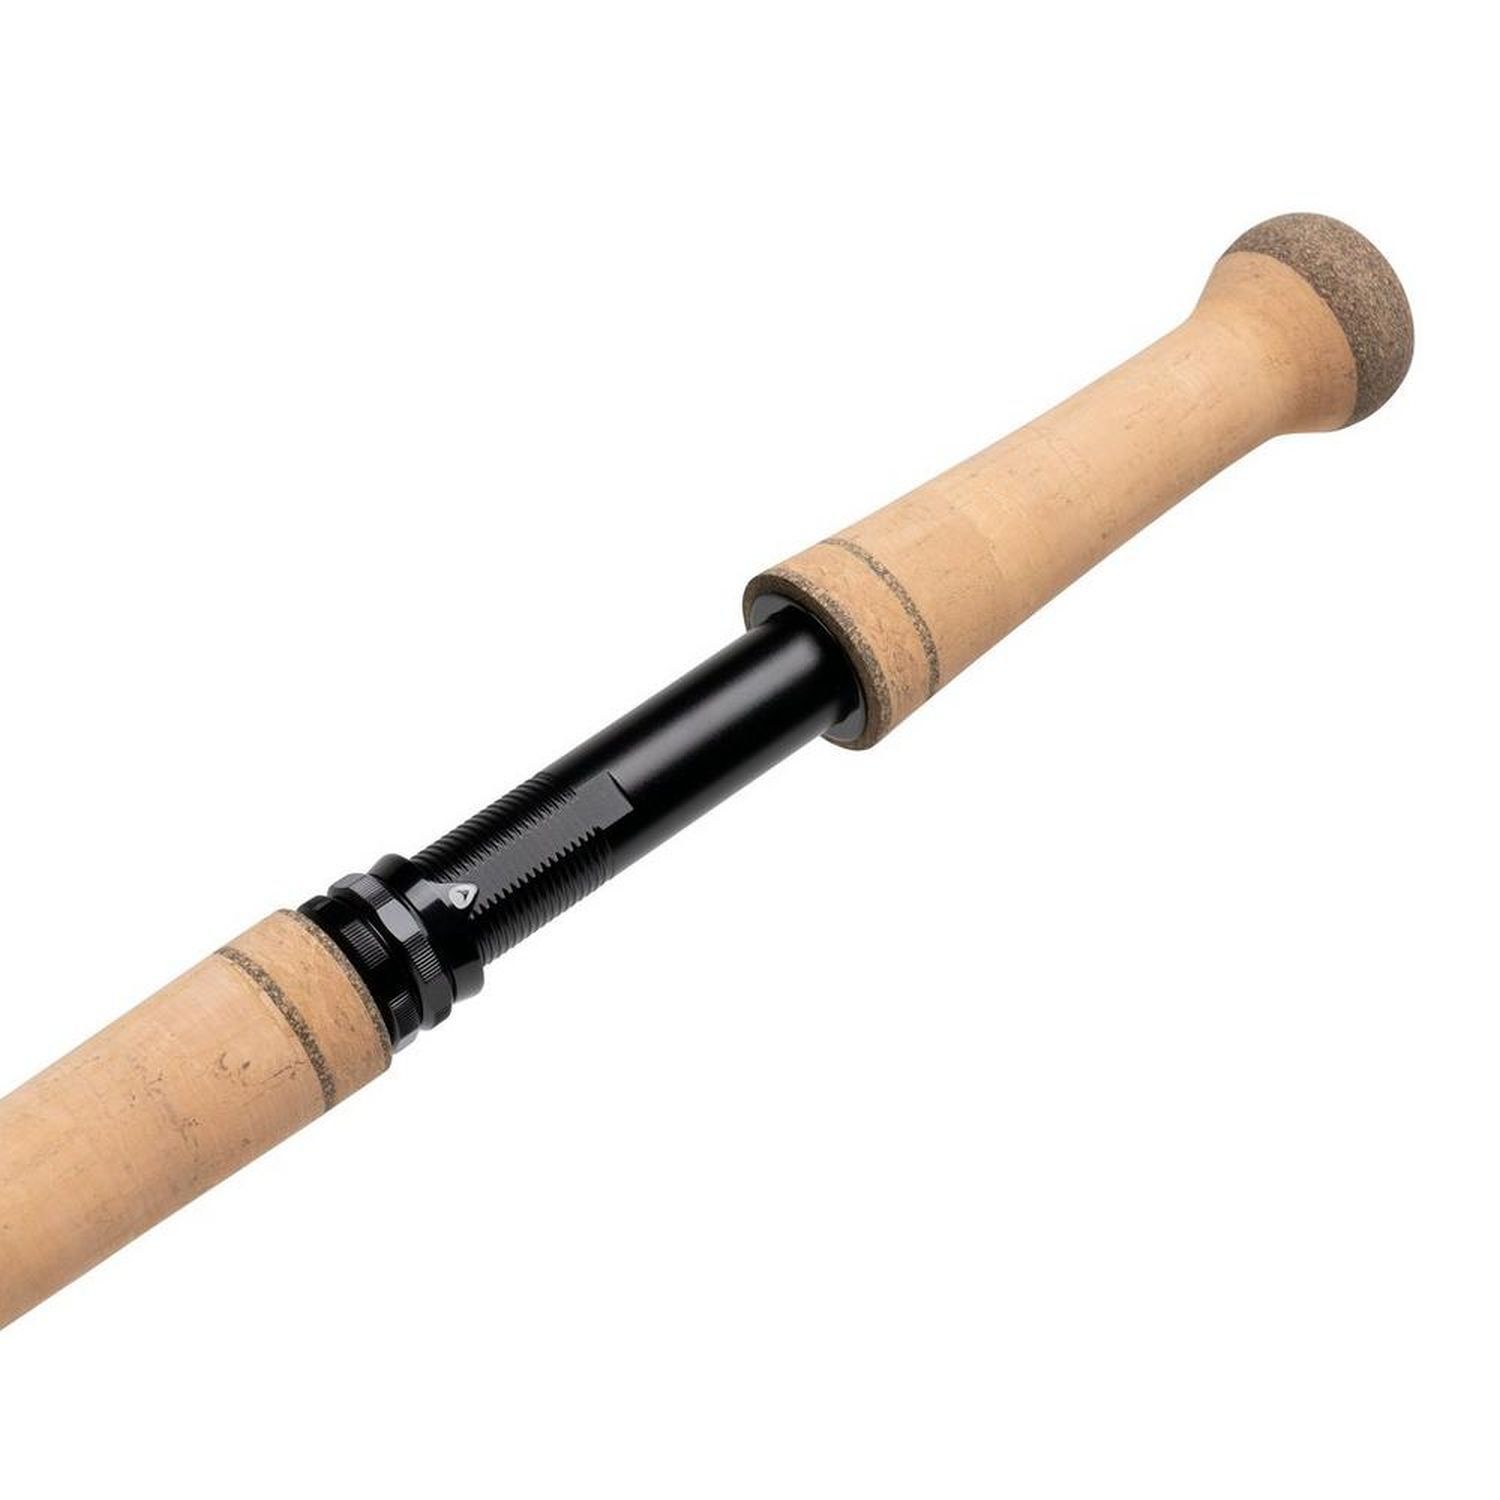 Greys Wing Travel Fly Rod online bobleisure